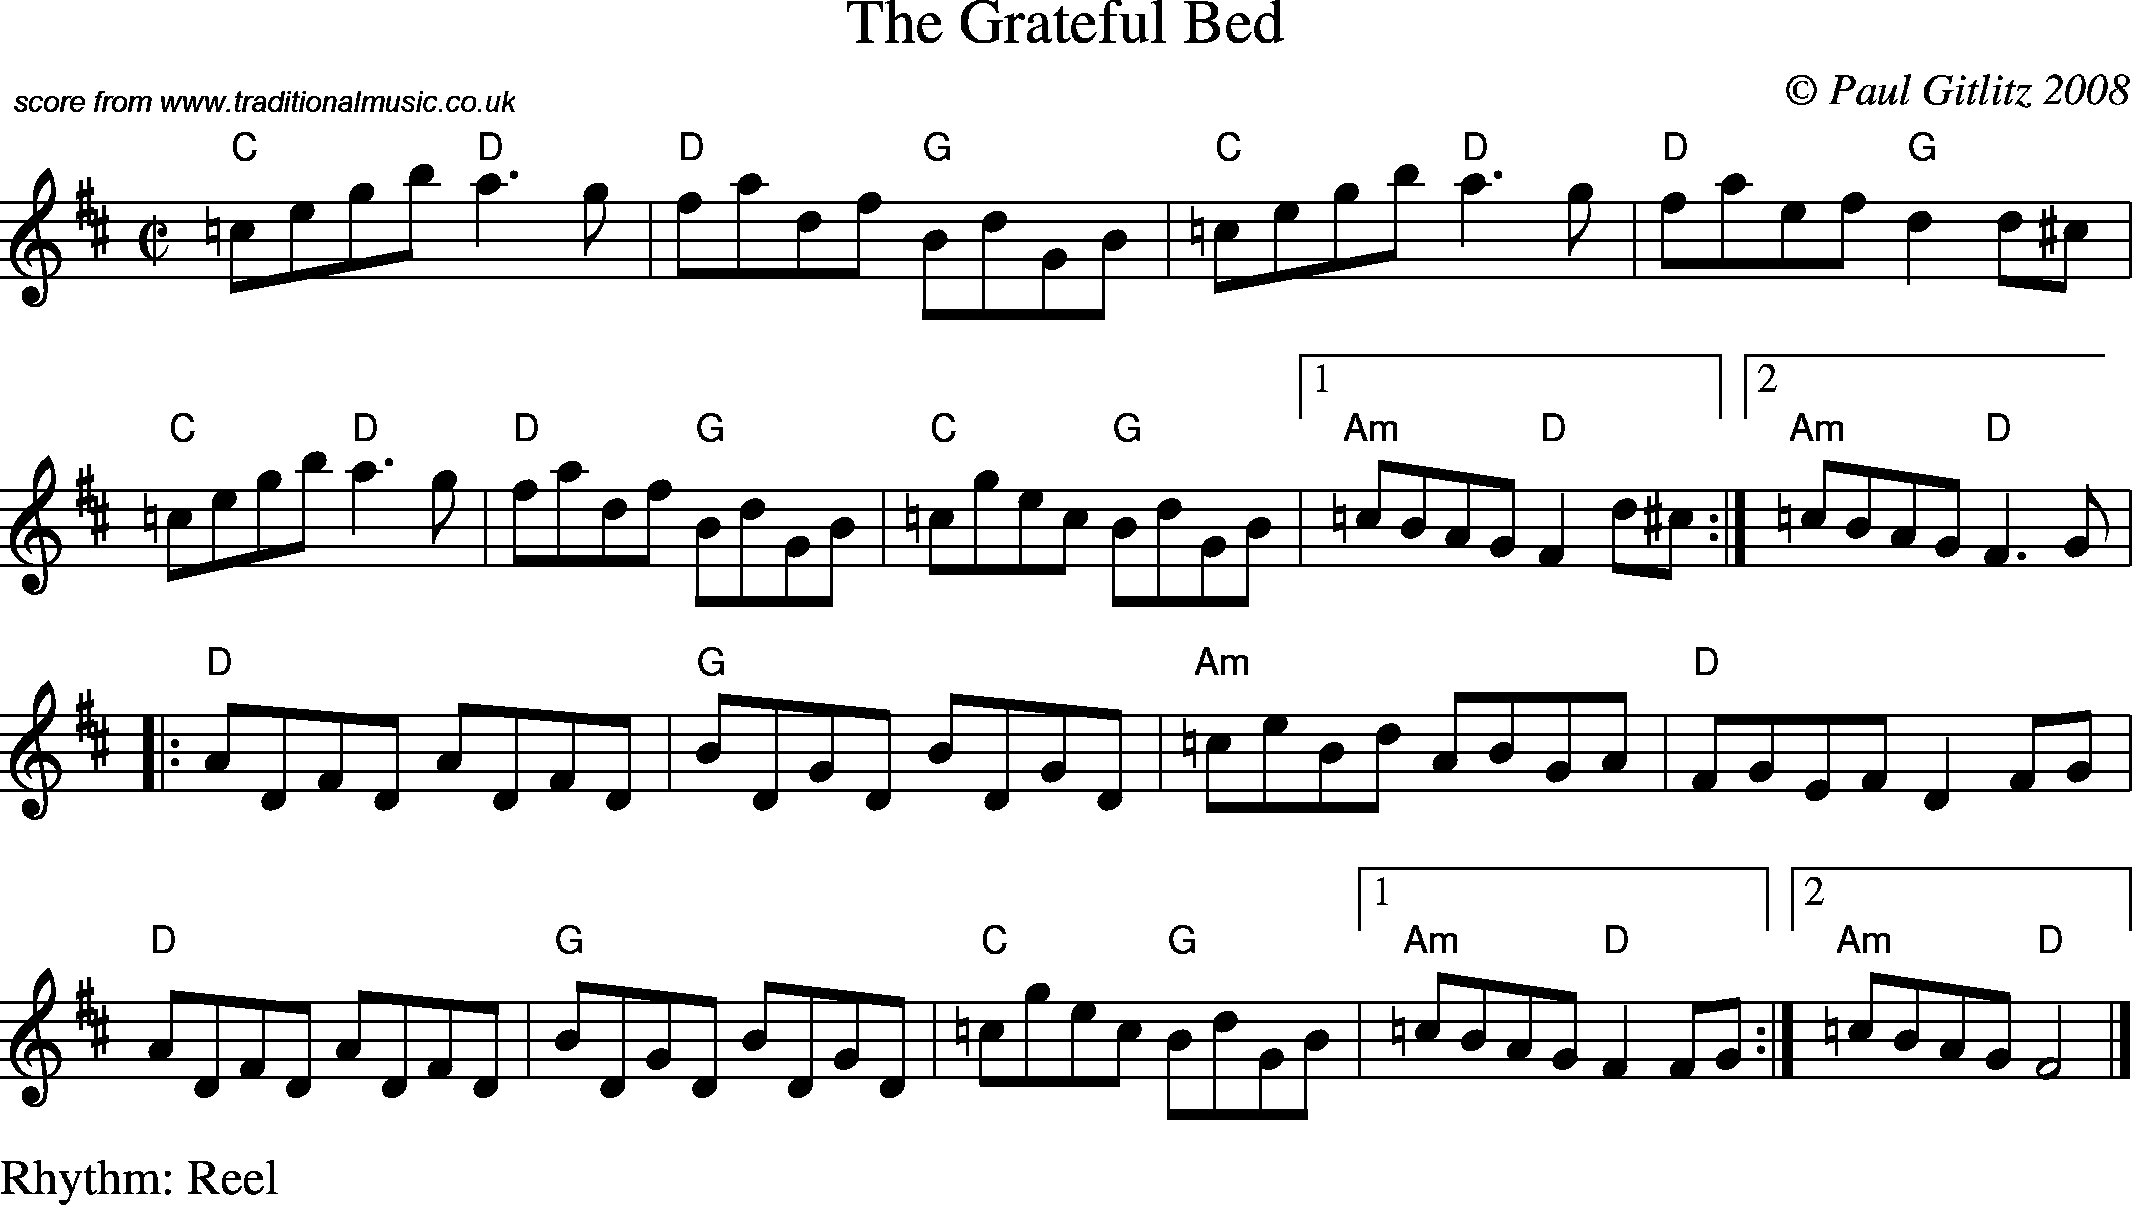 Sheet Music Score for Reel - Grateful Bed, The